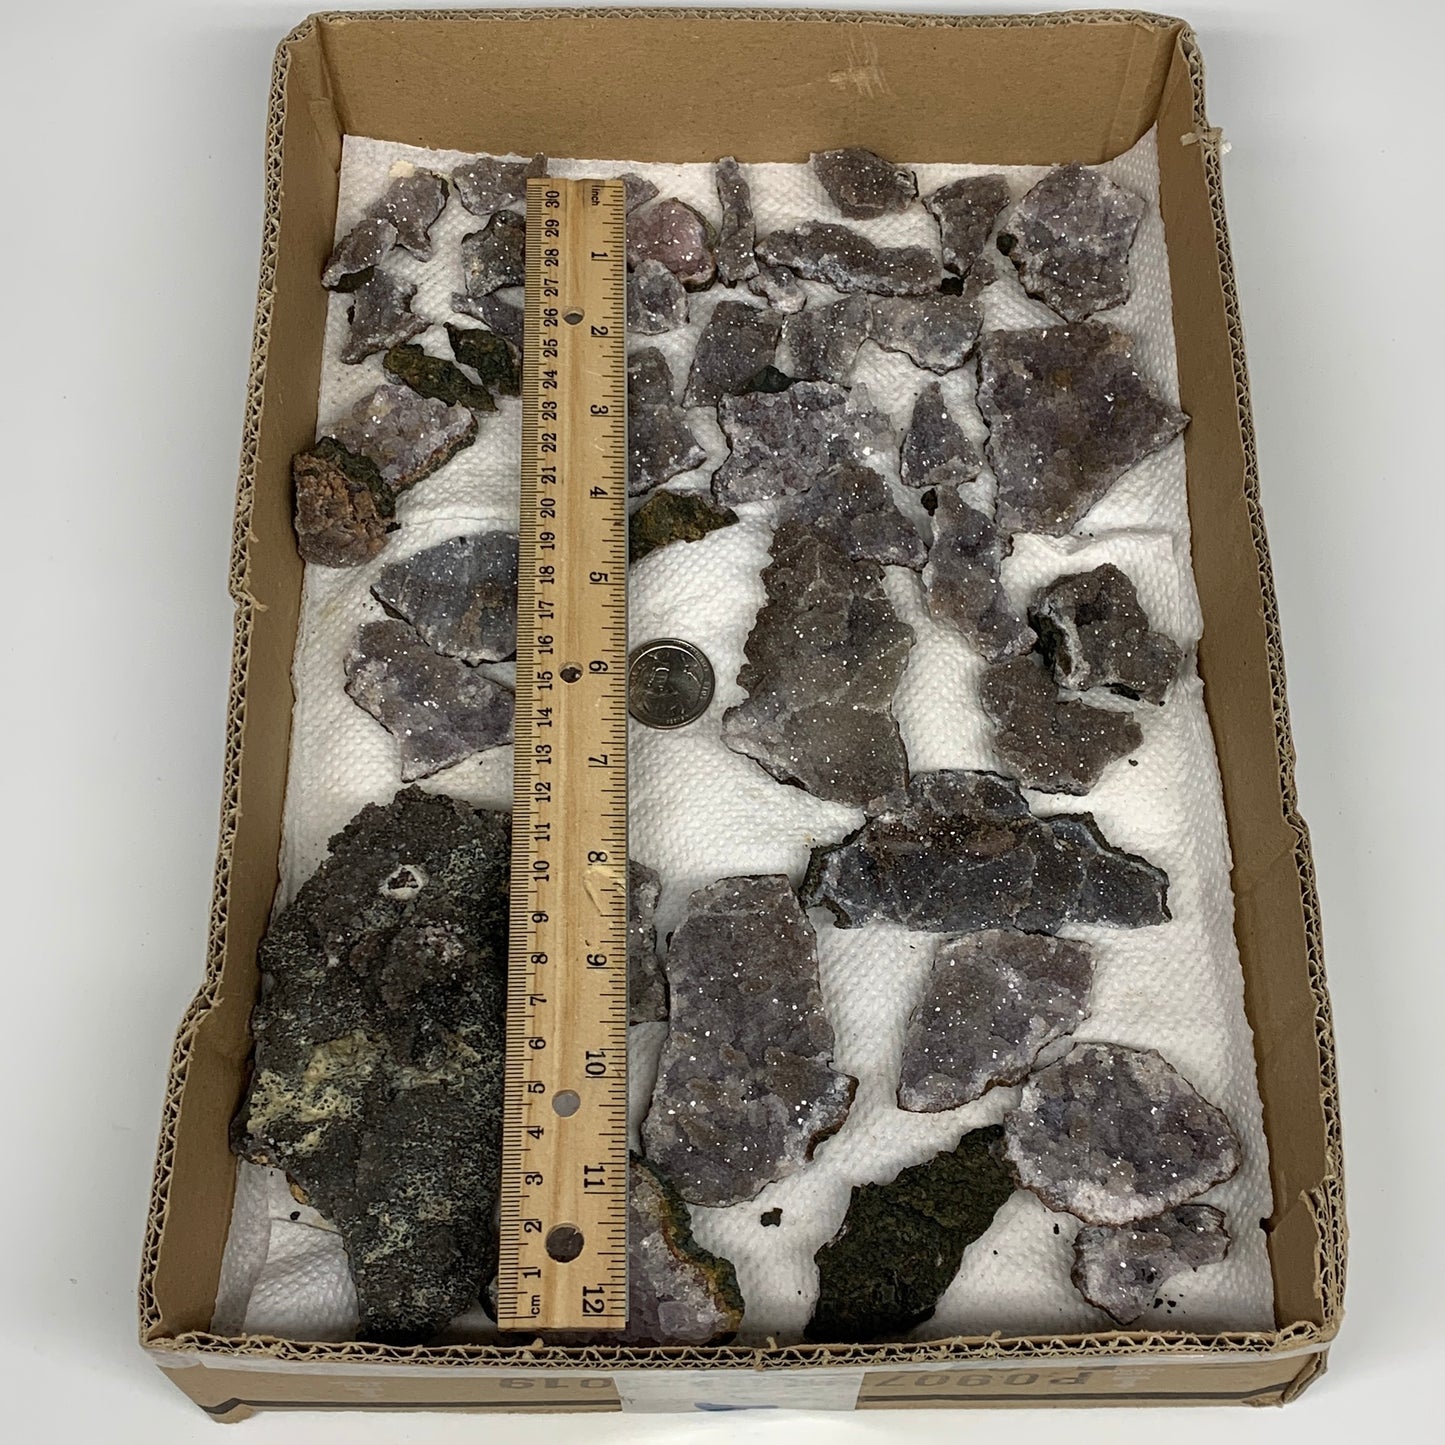 870g, 1"-5.3", Small Pieces Rough Manganese Cluster Mineral Specimen, B10951